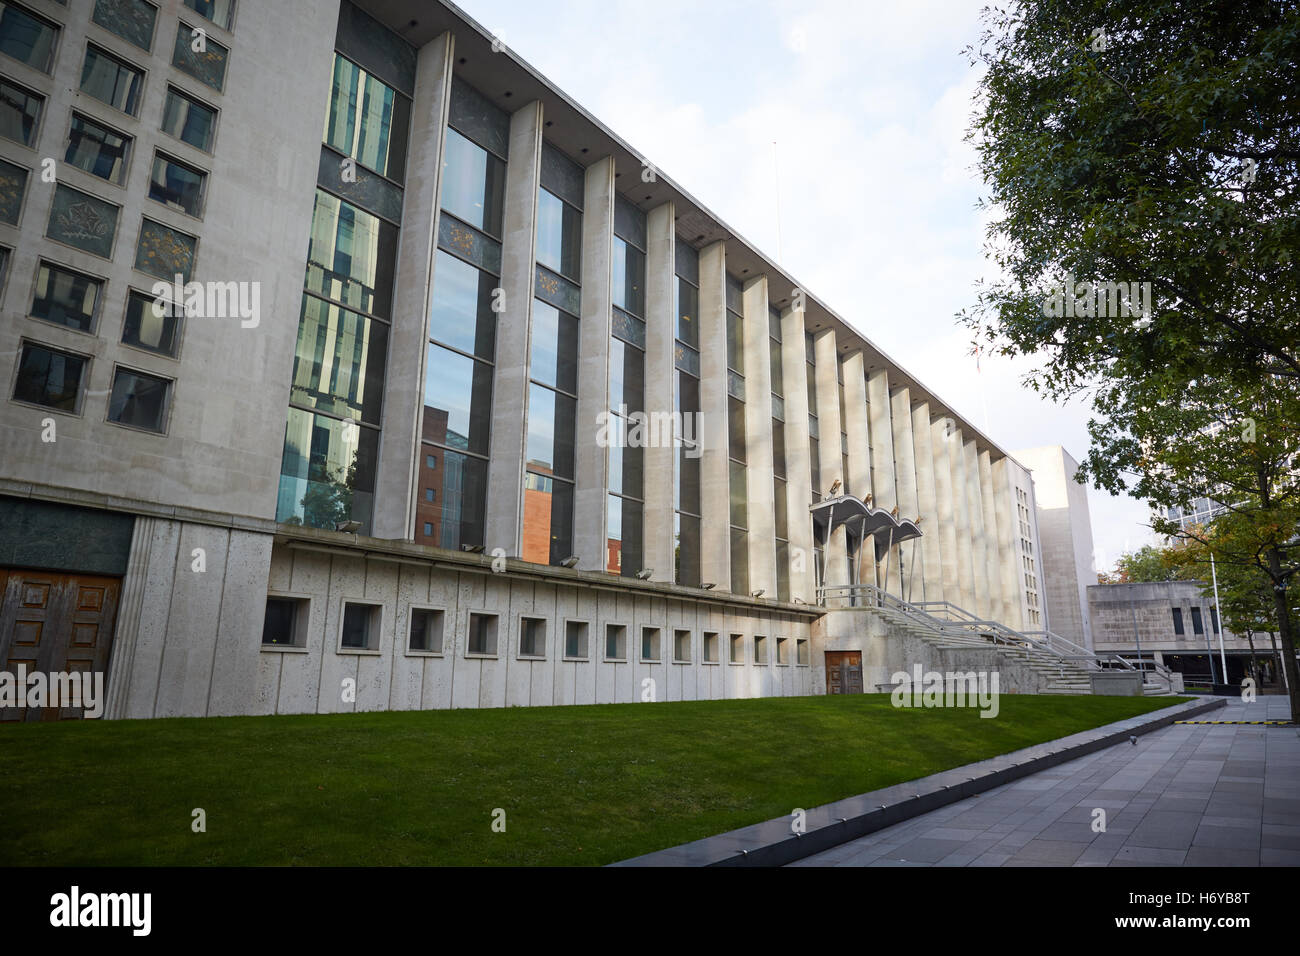 Manchester Crown Court exterior steps   Crown Square architecture law justice centre Building facilities law order crime punishm Stock Photo